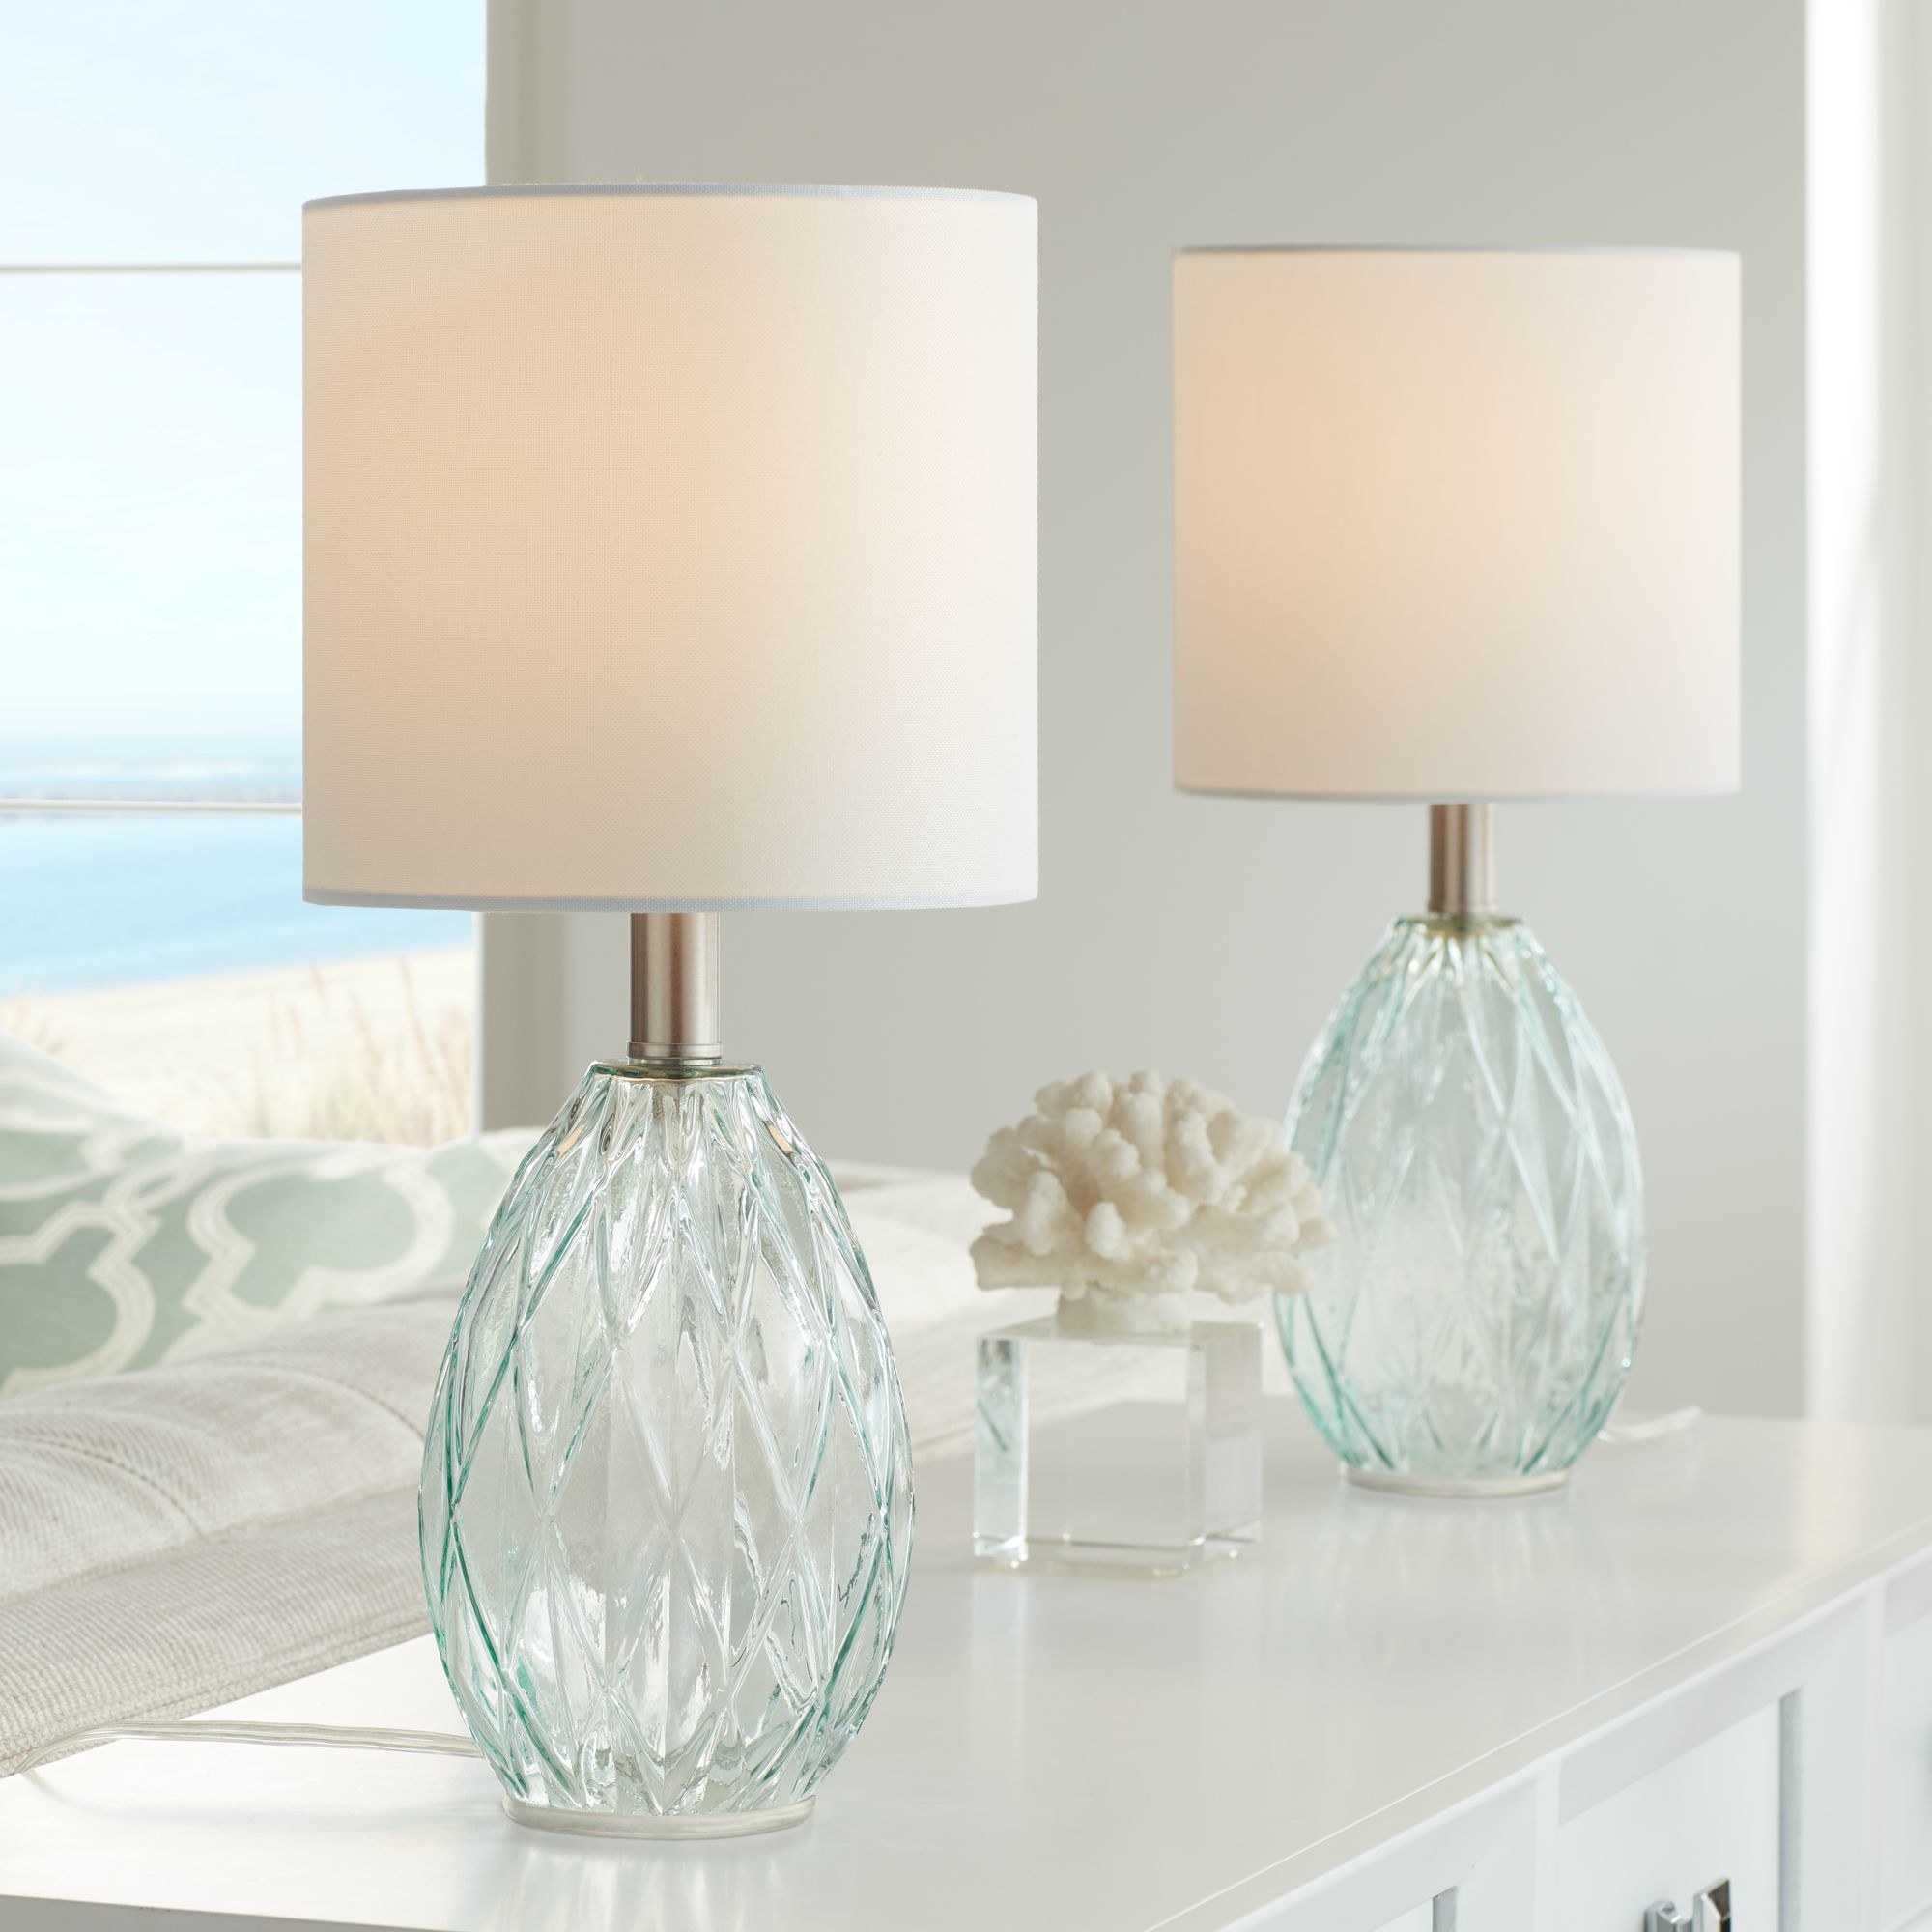 The two diamond blue-green bedroom lamps with a white-beige lamp shades